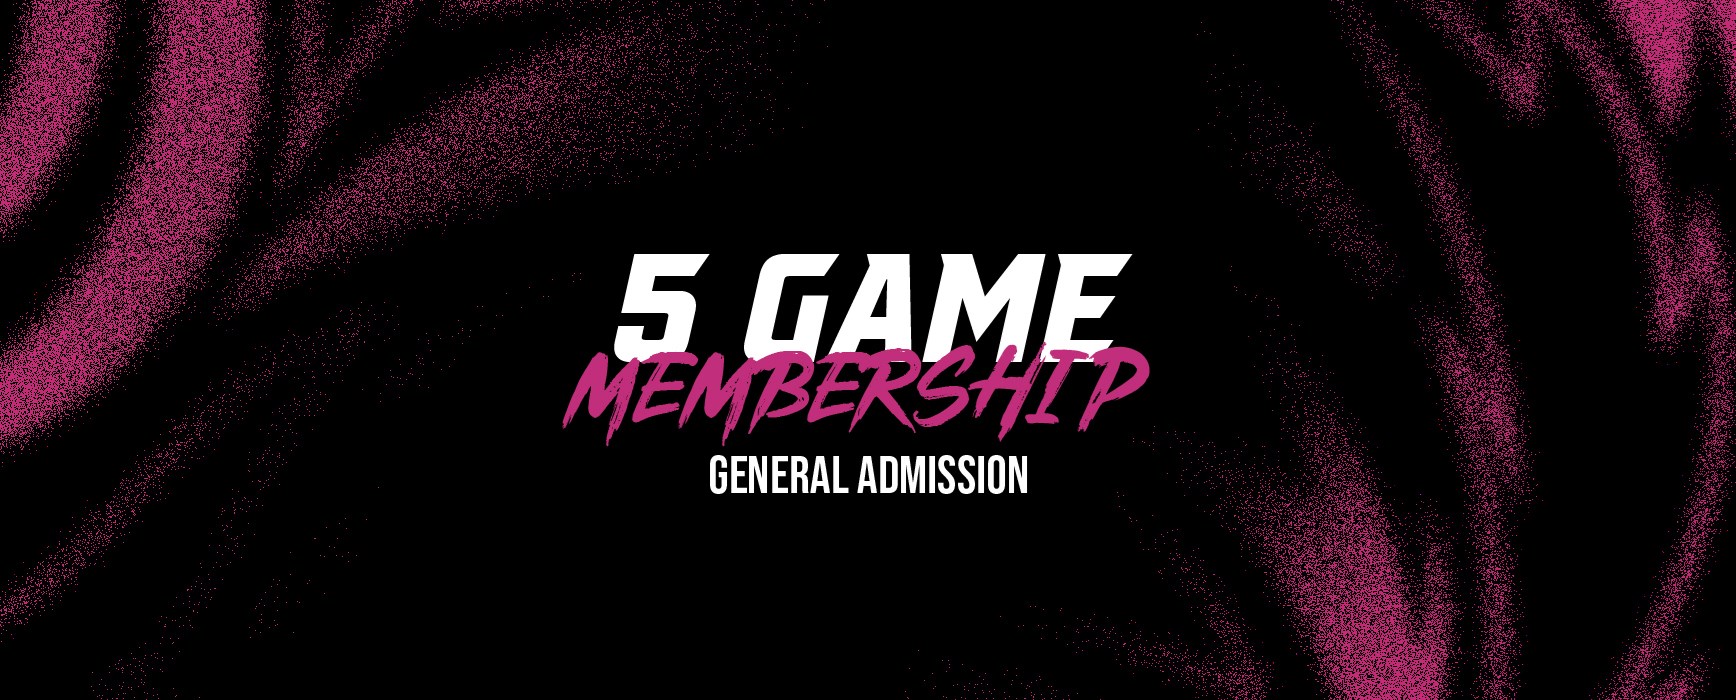 5 Game General Admission